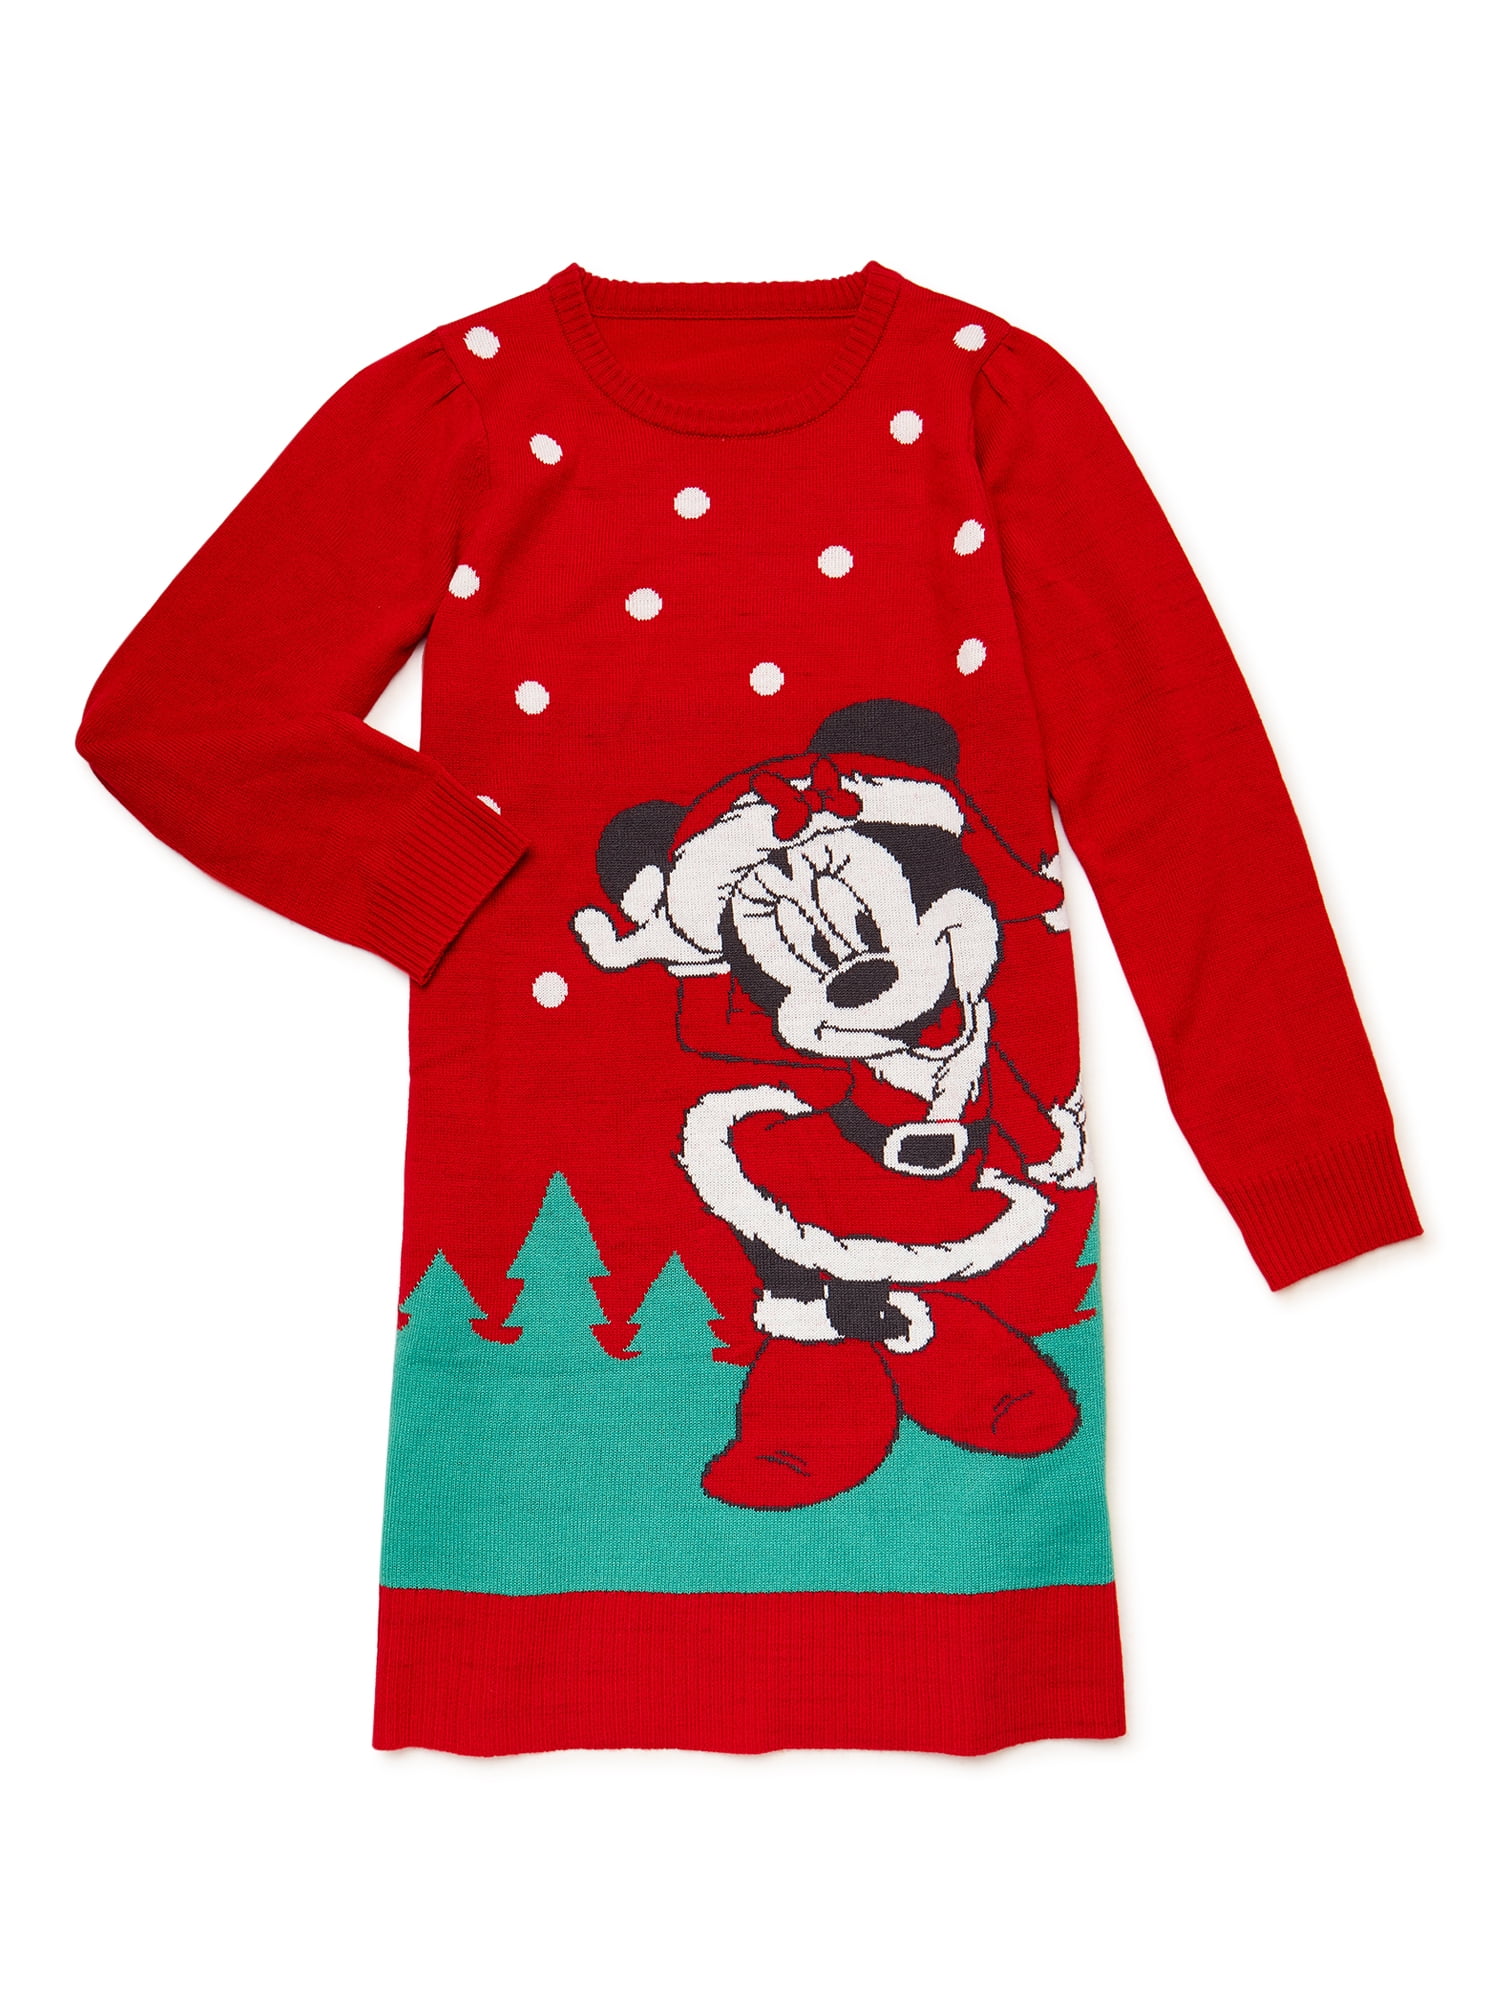 Minnie Mouse Girls Christmas Sweater Dress, Sizes 4-12